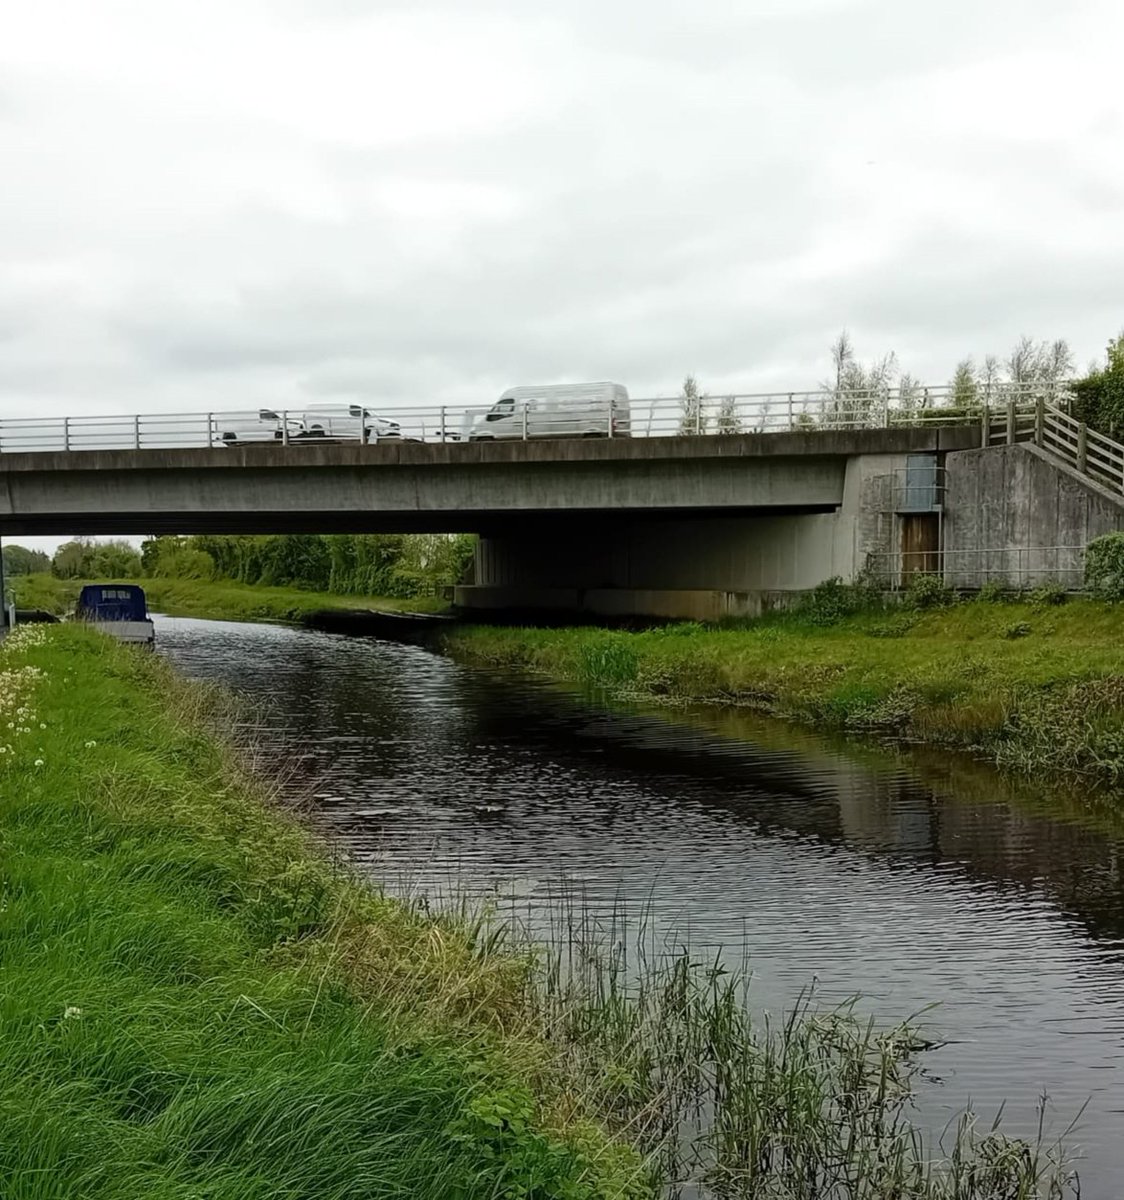 Here is a 21st motorway running over the equivalent 18th century motorway, the canal. 

The best infrastructure lasts and serves needs beyond our time. 
@waterwaysirelan 
#transportpolicy #canals #irishcanals #barrowline